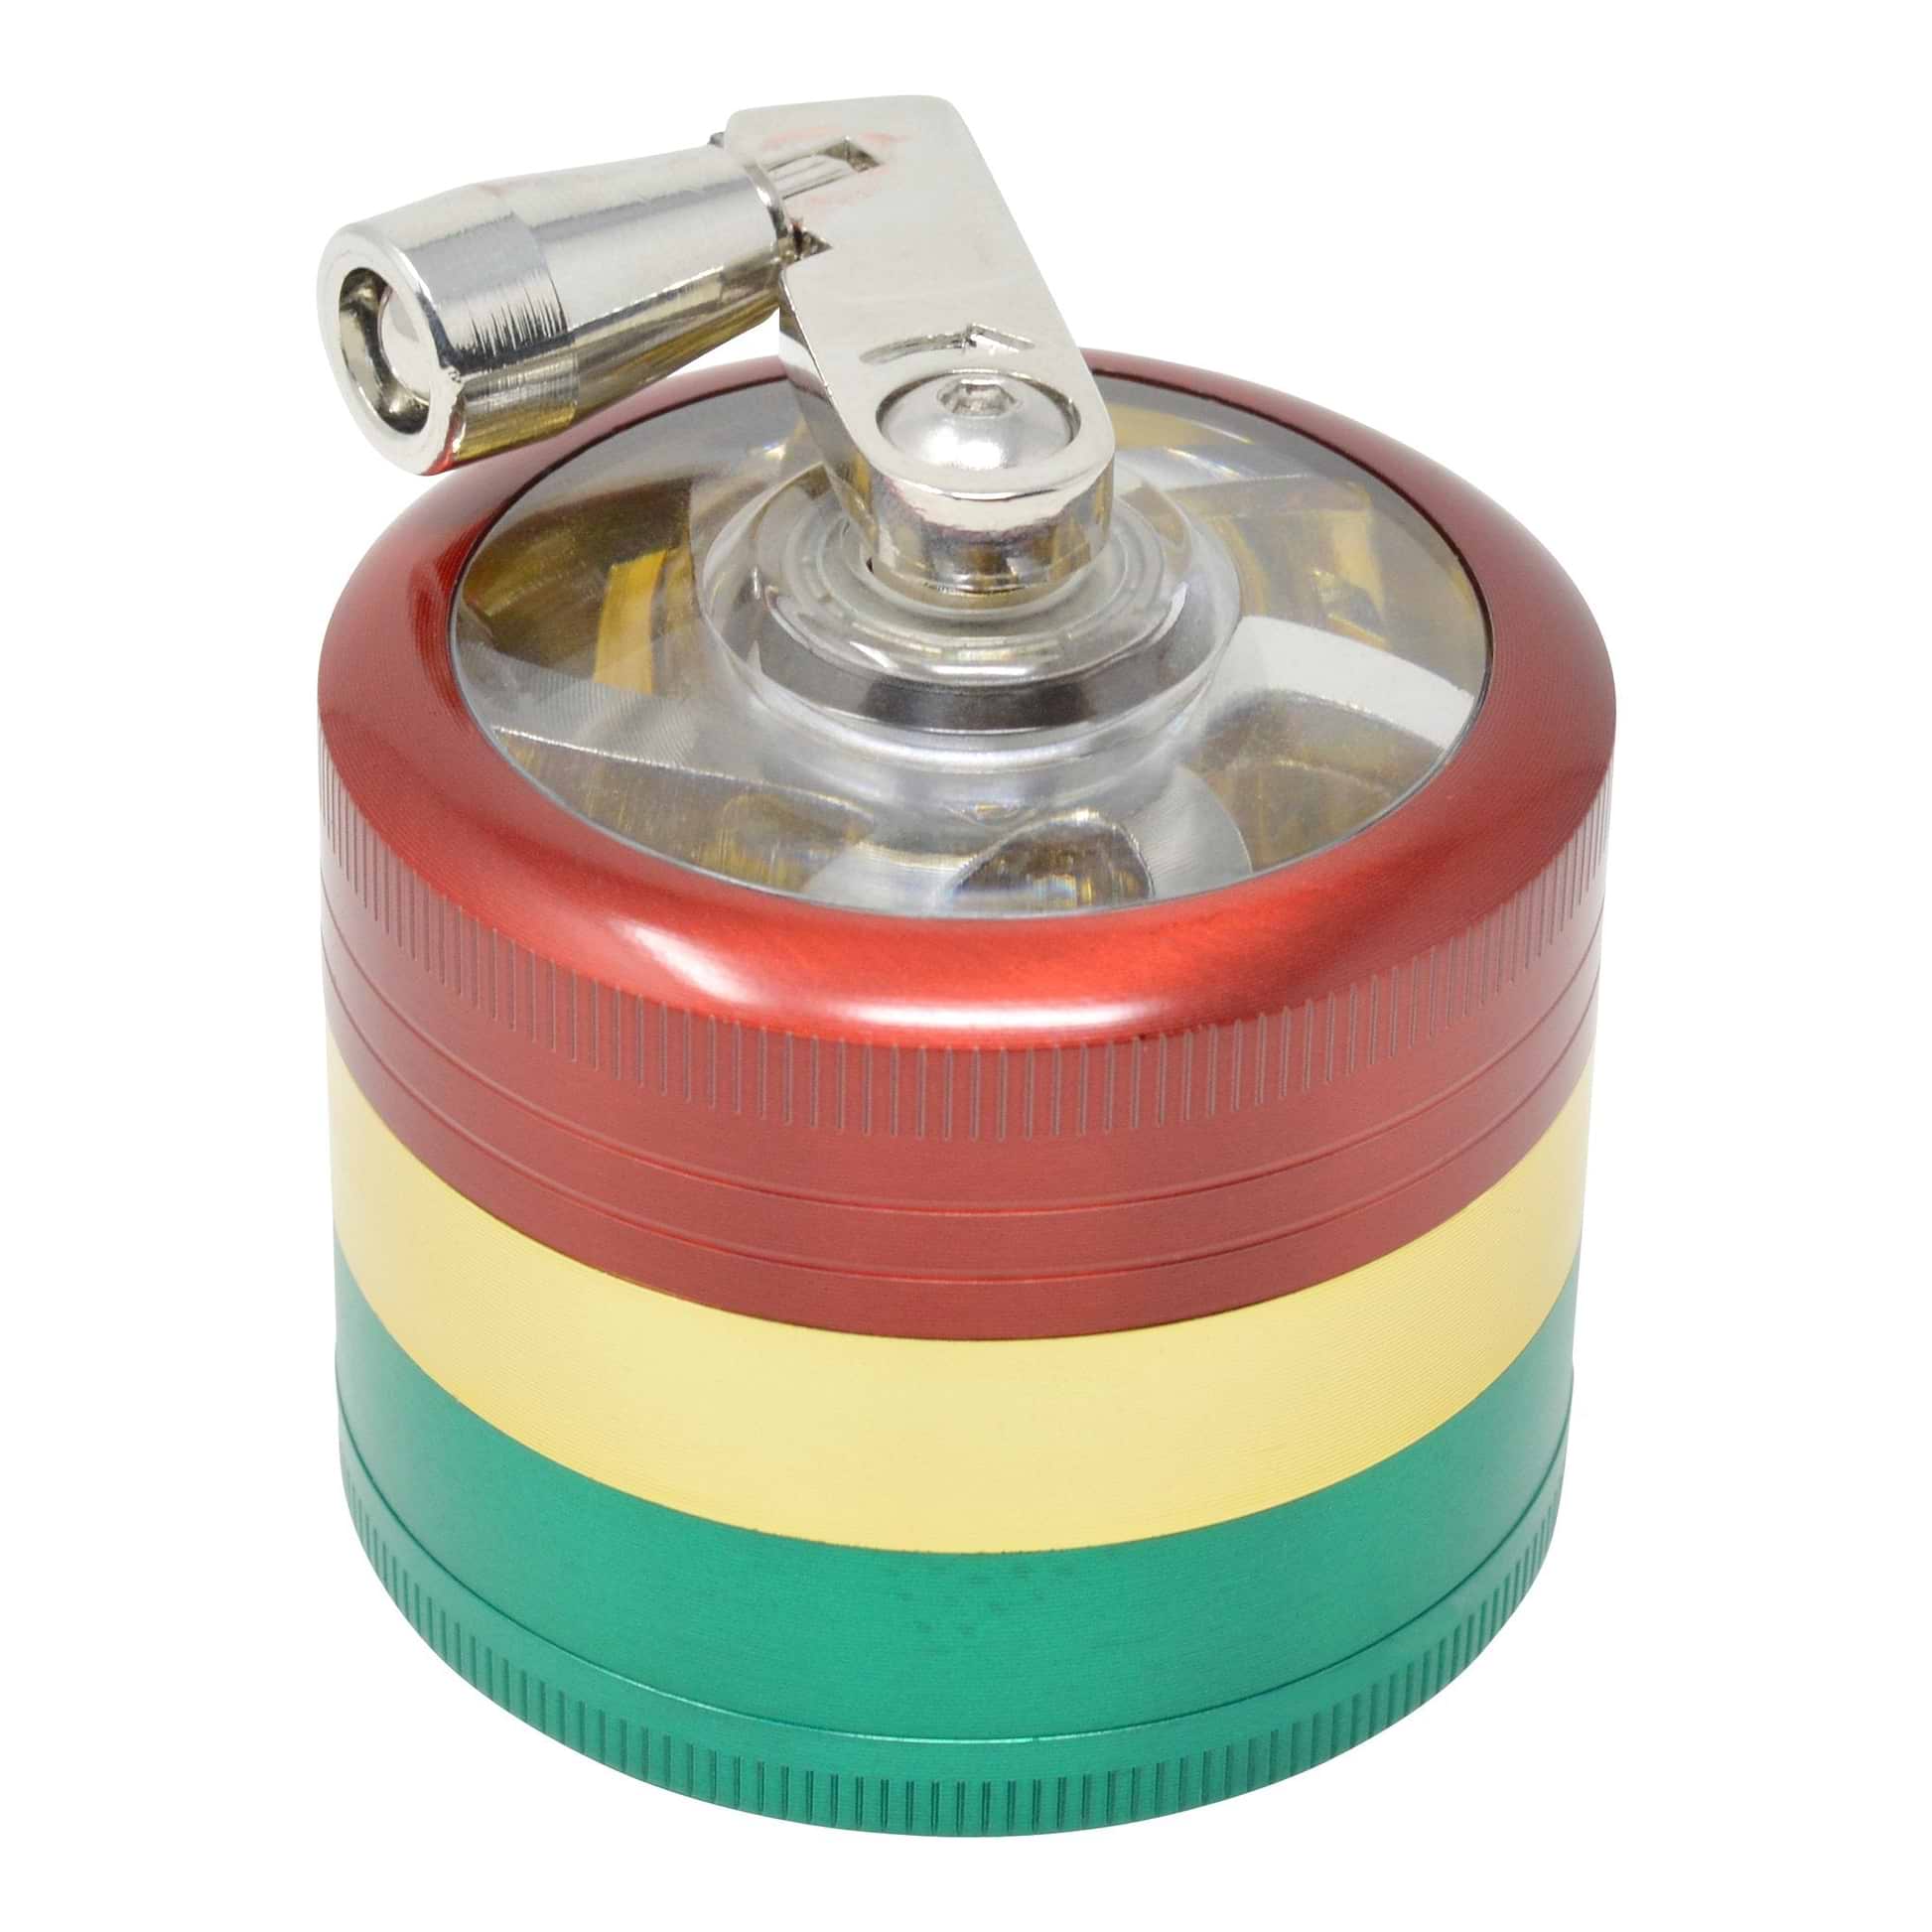 High angle close up shot of closed rasta dub grinder in red, yellow and green colors with hand crank on left